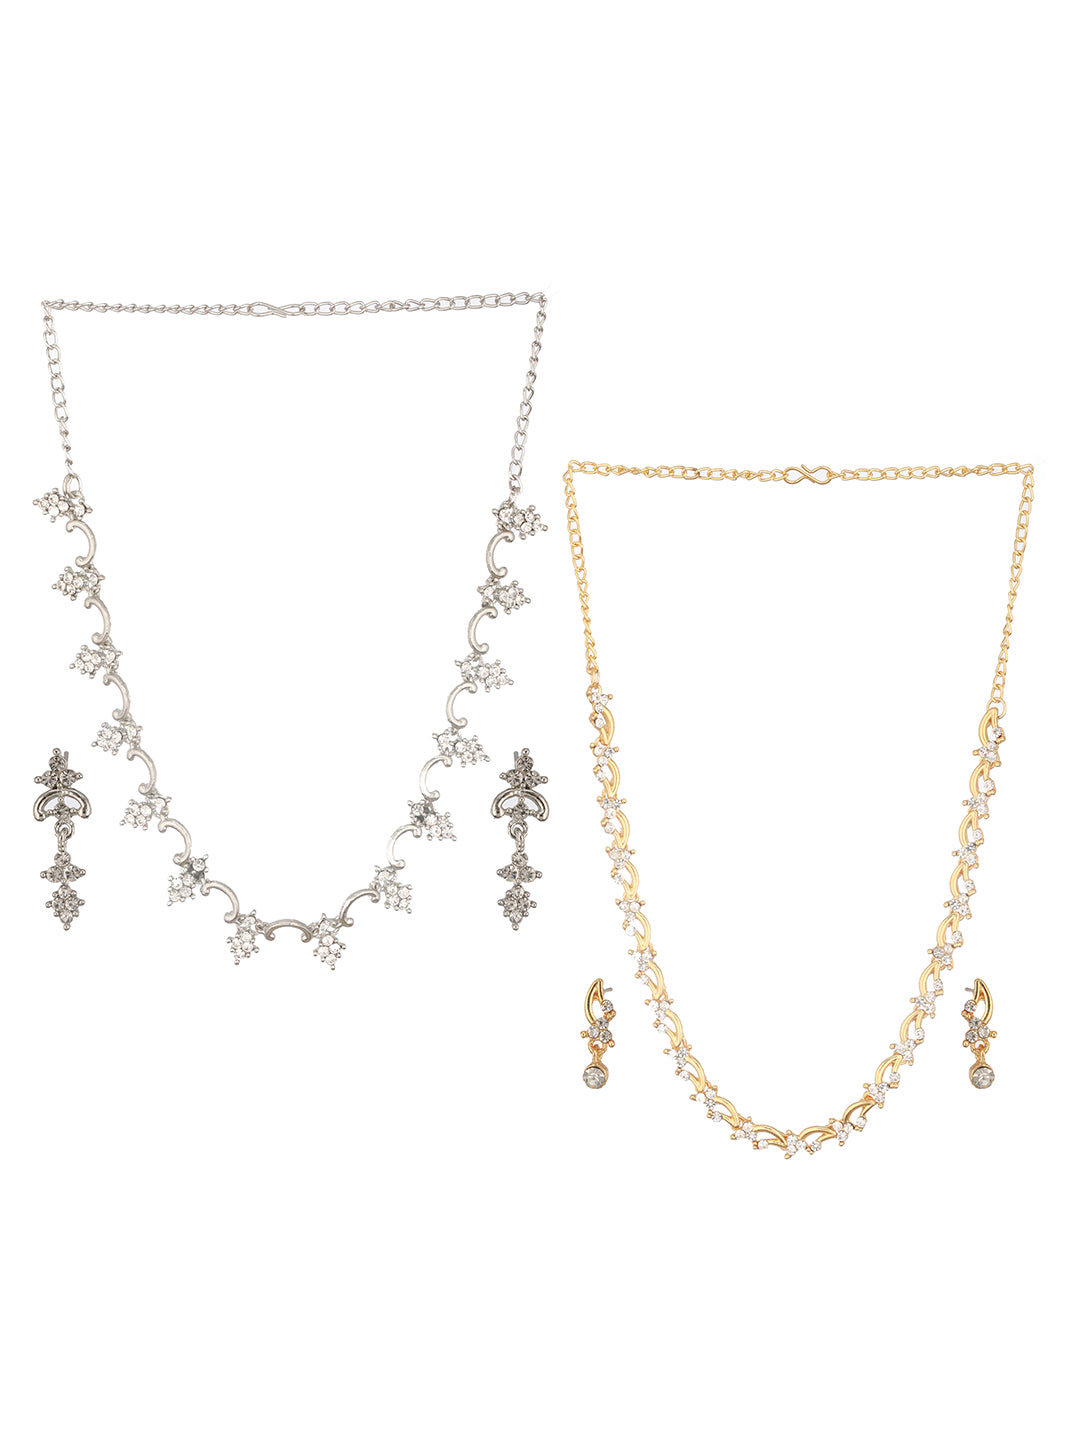 Jazz And Sizzle Set of 2 Gold & Silver Plated CZ Studded Jewelry SetS - Jazzandsizzle